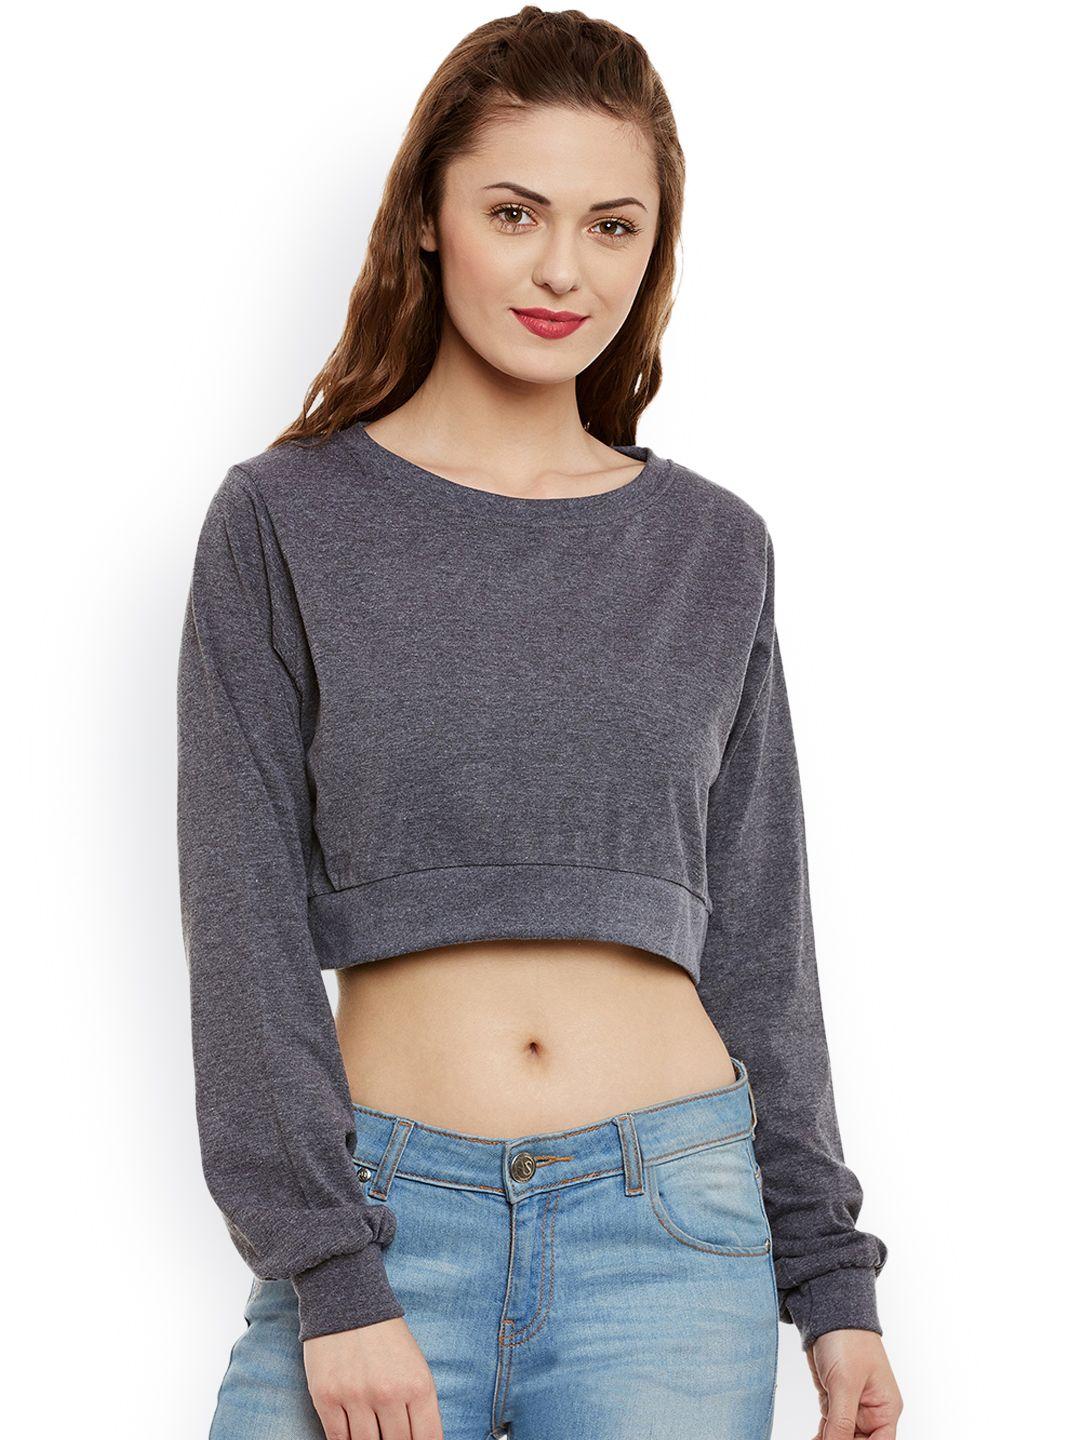 miss-chase-charcoal-grey-crop-pure-cotton-top